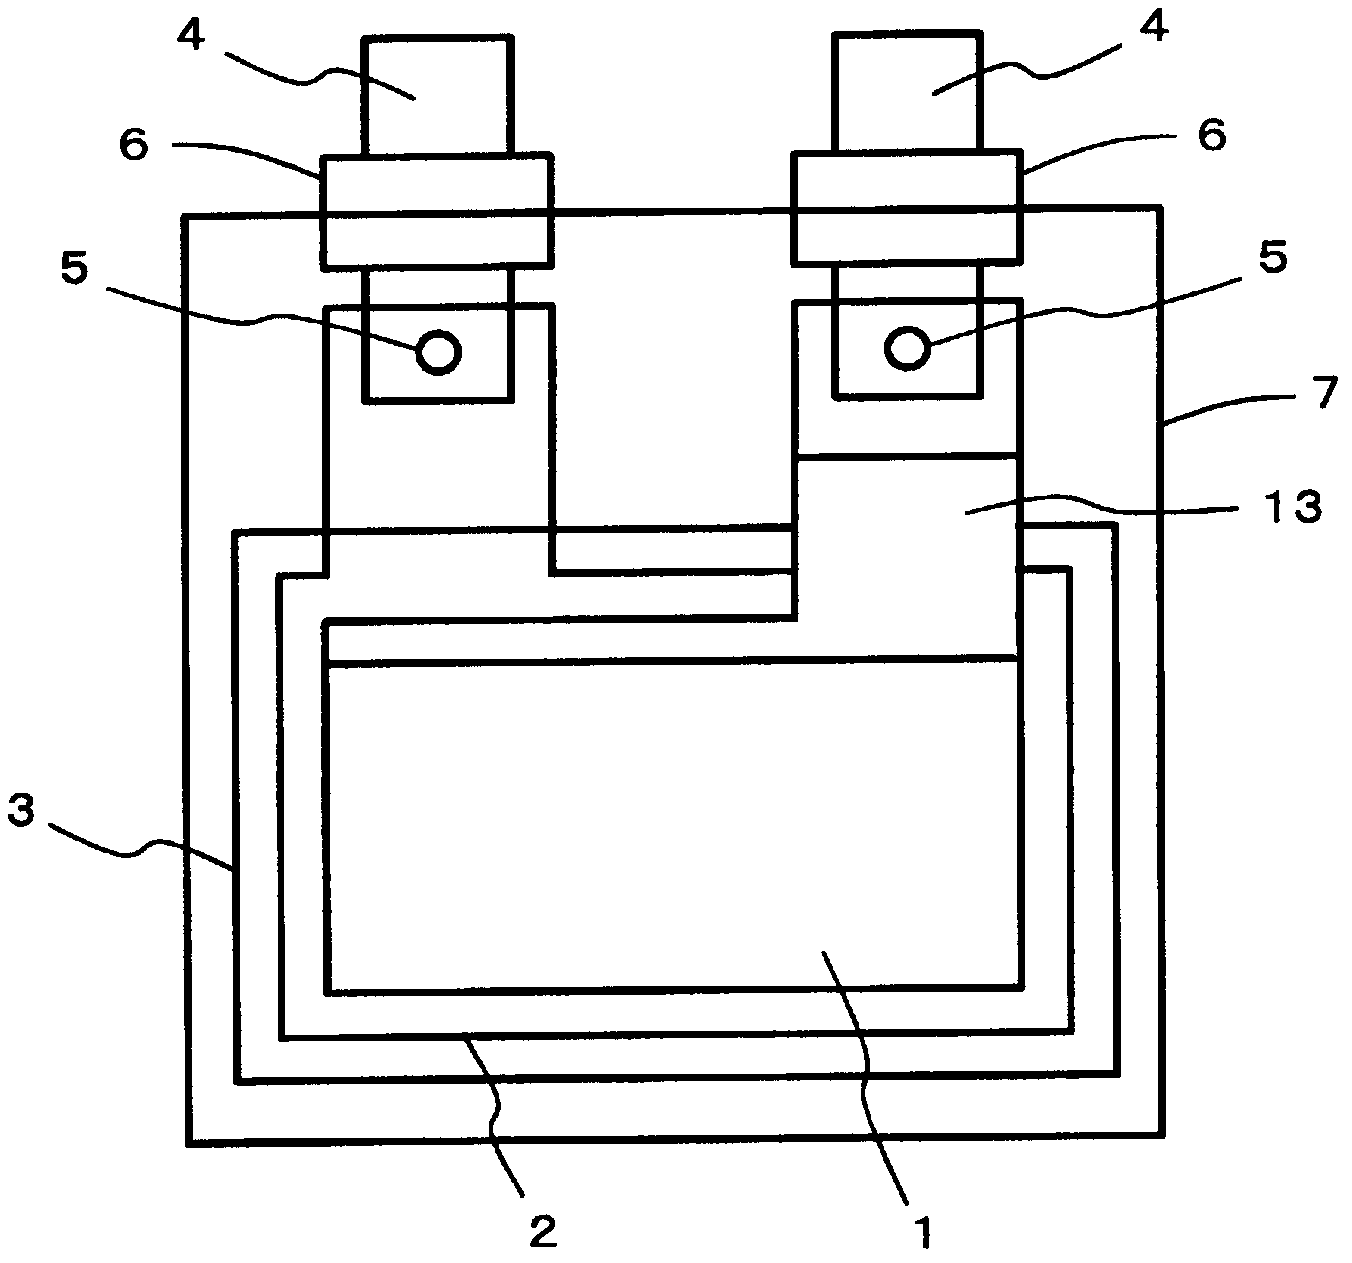 Secondary battery, method for manufacturing same, and thermal adhesive insulating film for secondary battery